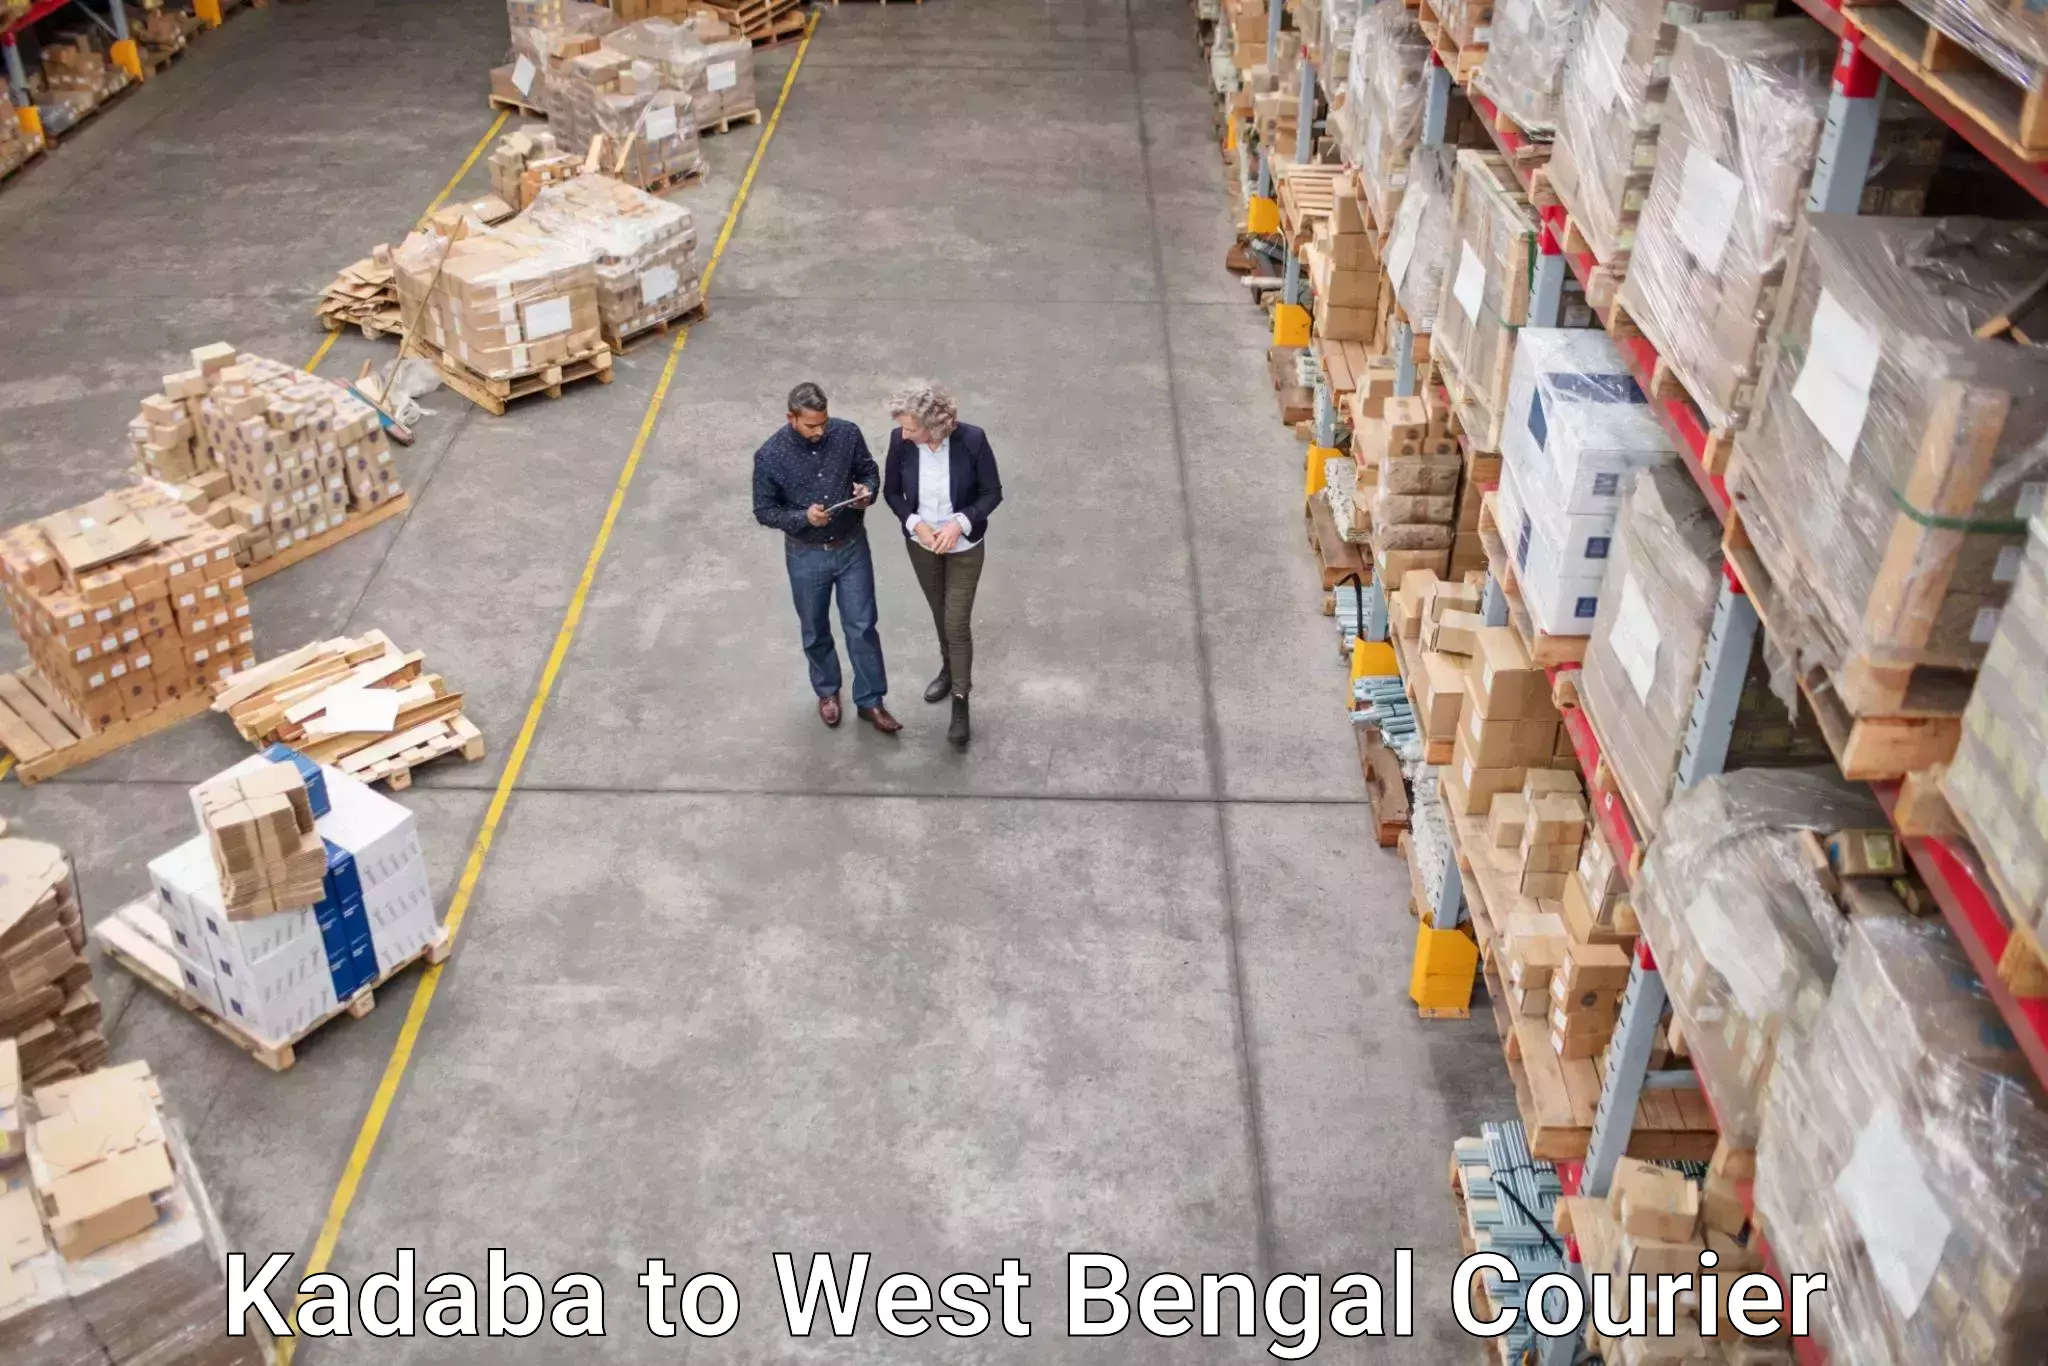 Expedited parcel delivery Kadaba to West Bengal